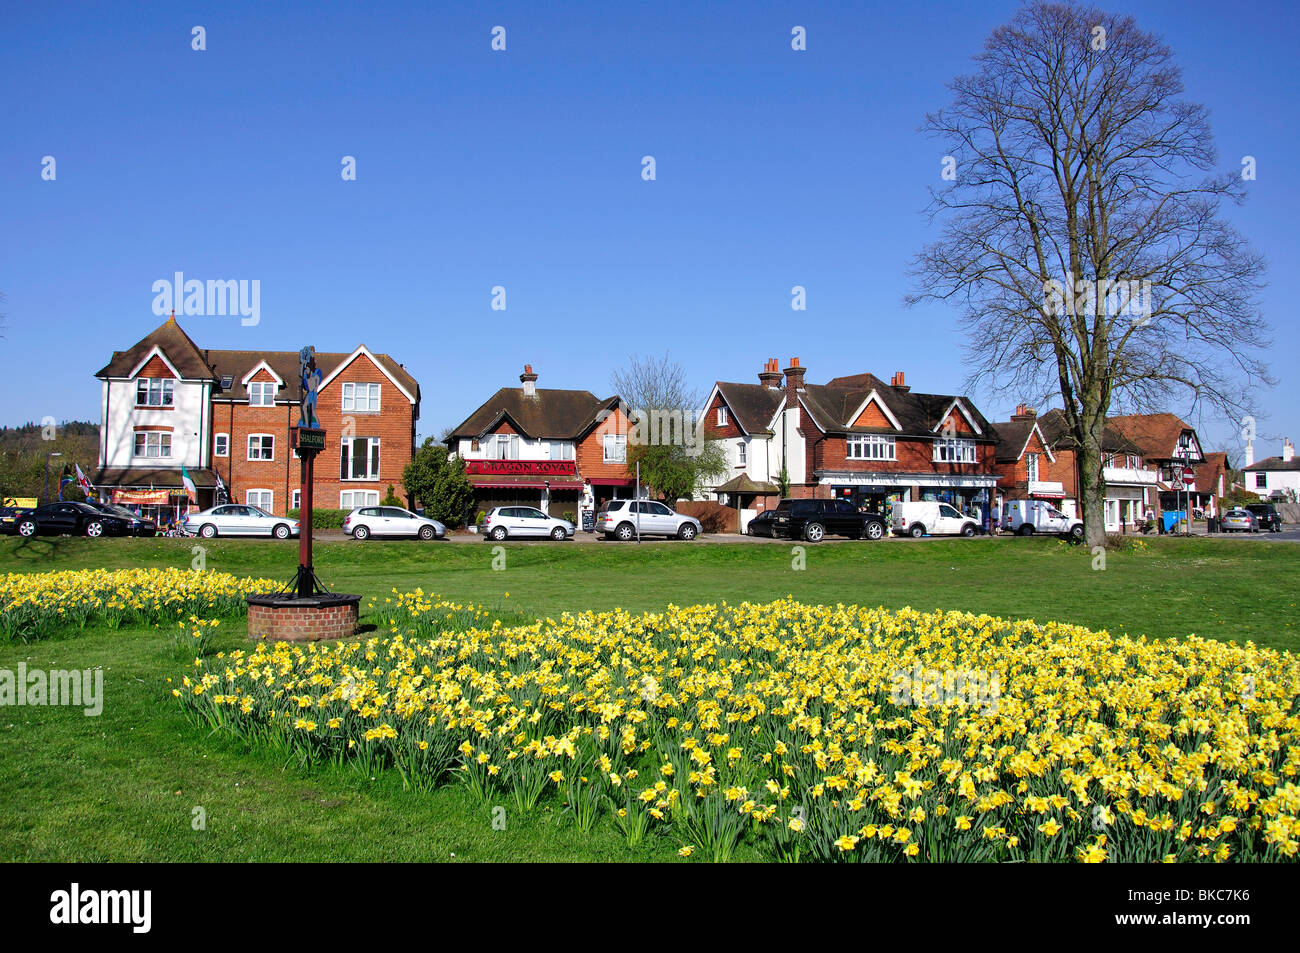 Village sign with daffodils, The Green, Shalford, Surrey, England, United Kingdom Stock Photo